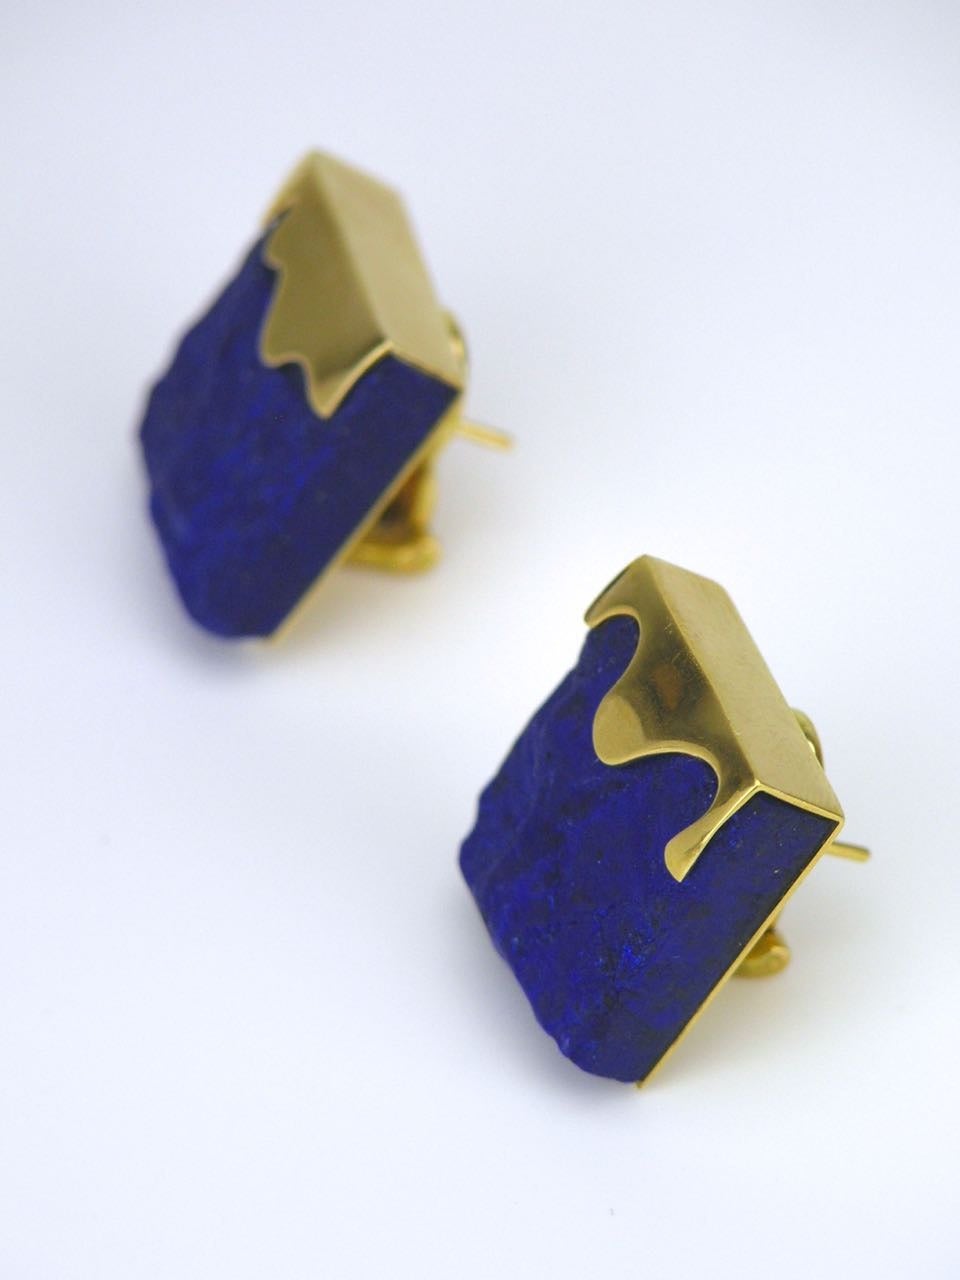 A pair of 18k yellow gold and lapis lazuli earrings each earring consisting of a rectangular 